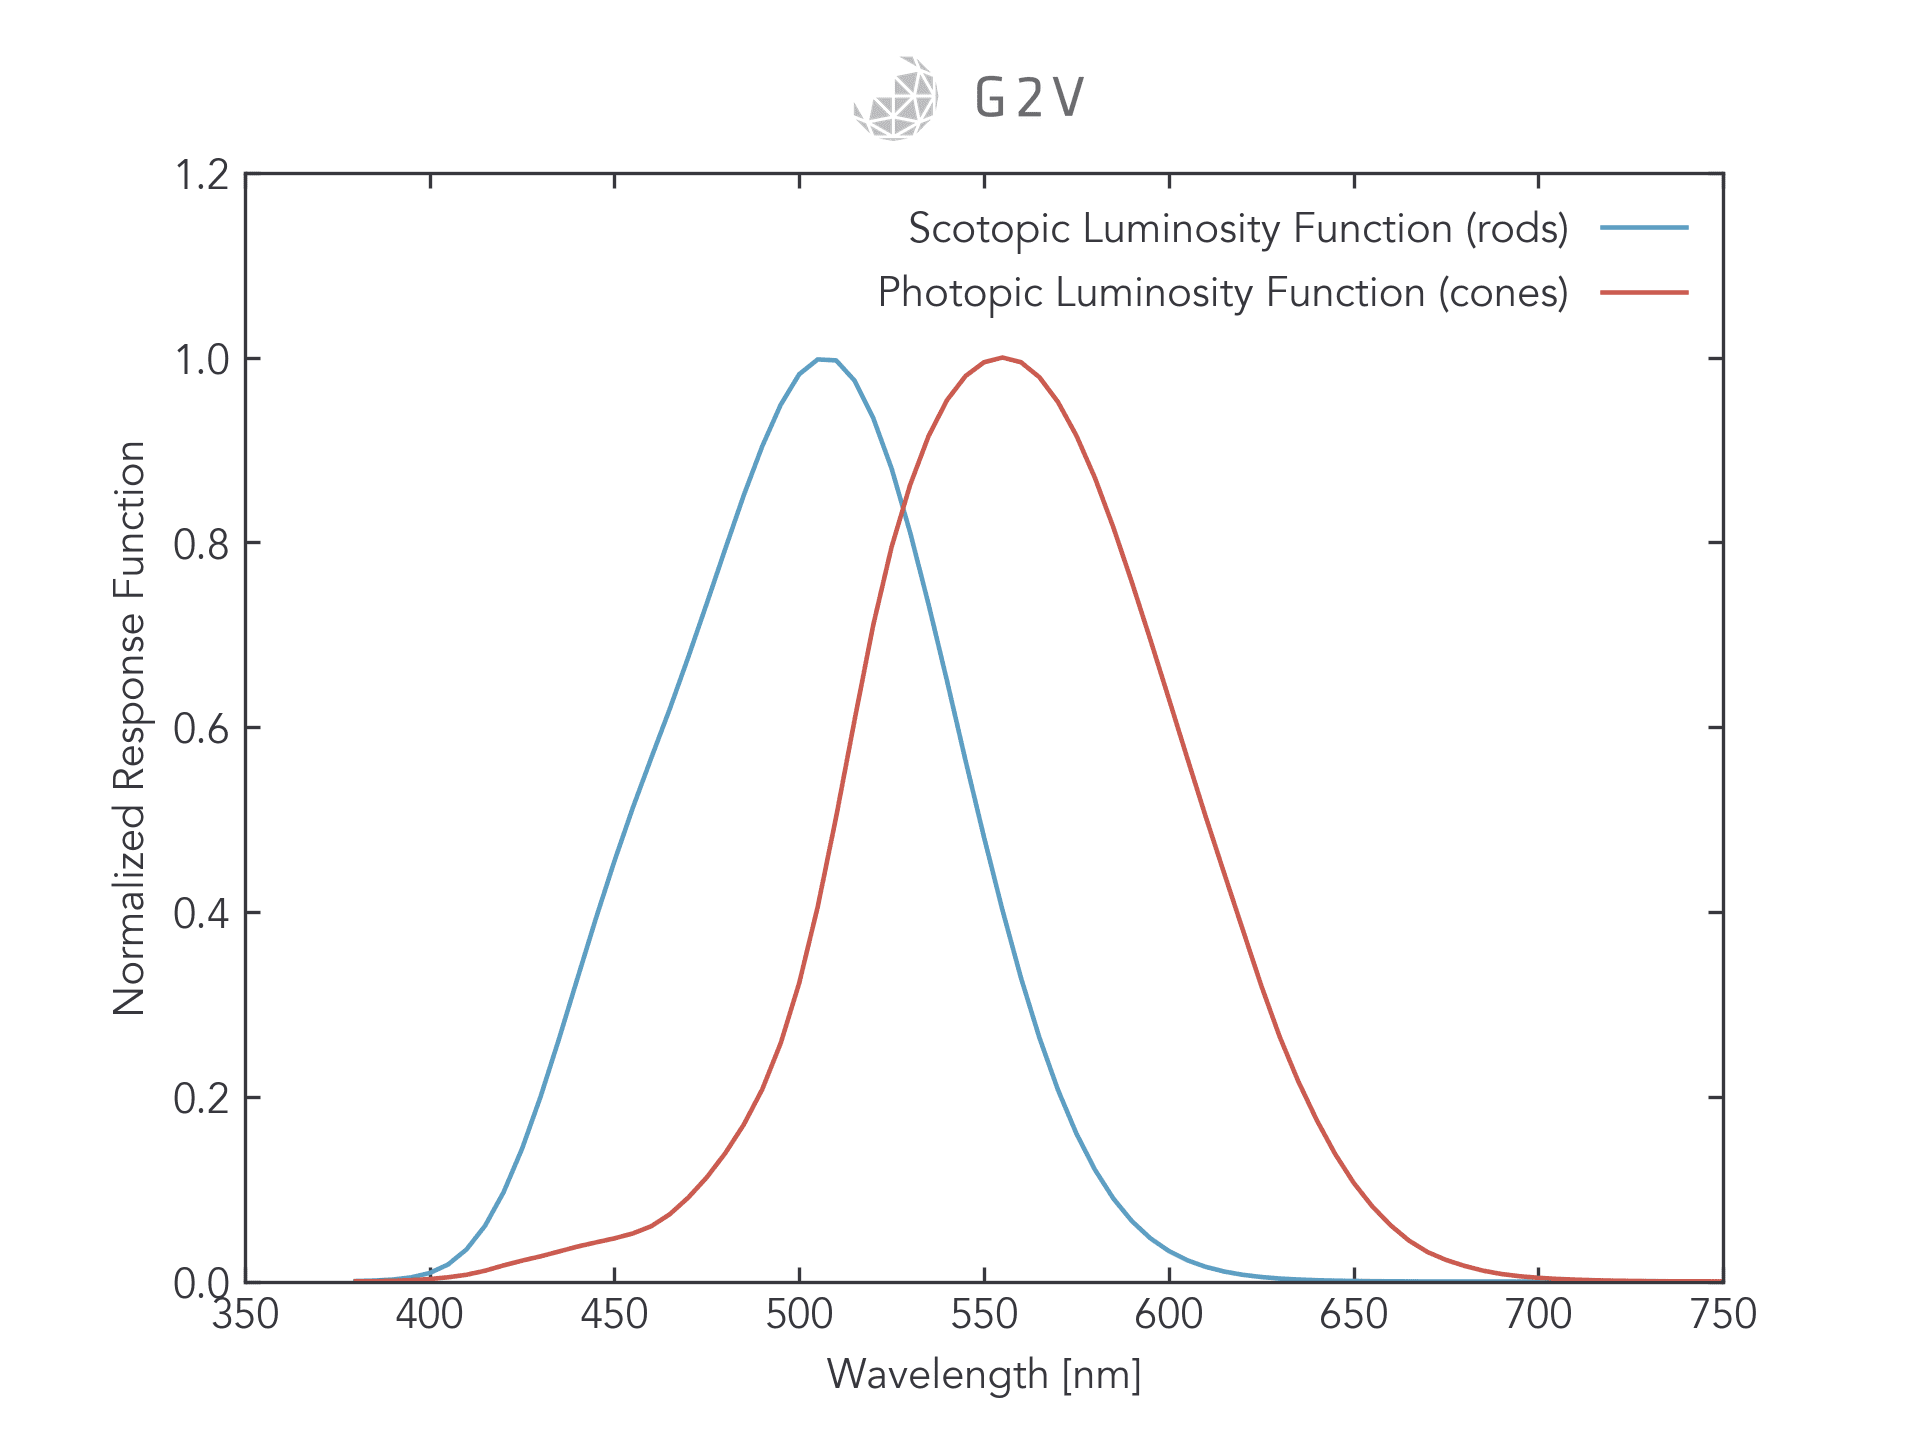 The two different response, or luminosity functions of the human eye, corresponding to the behaviour of rods and cones. Data source: Colour & Vision Research Laboratory of the University College London.